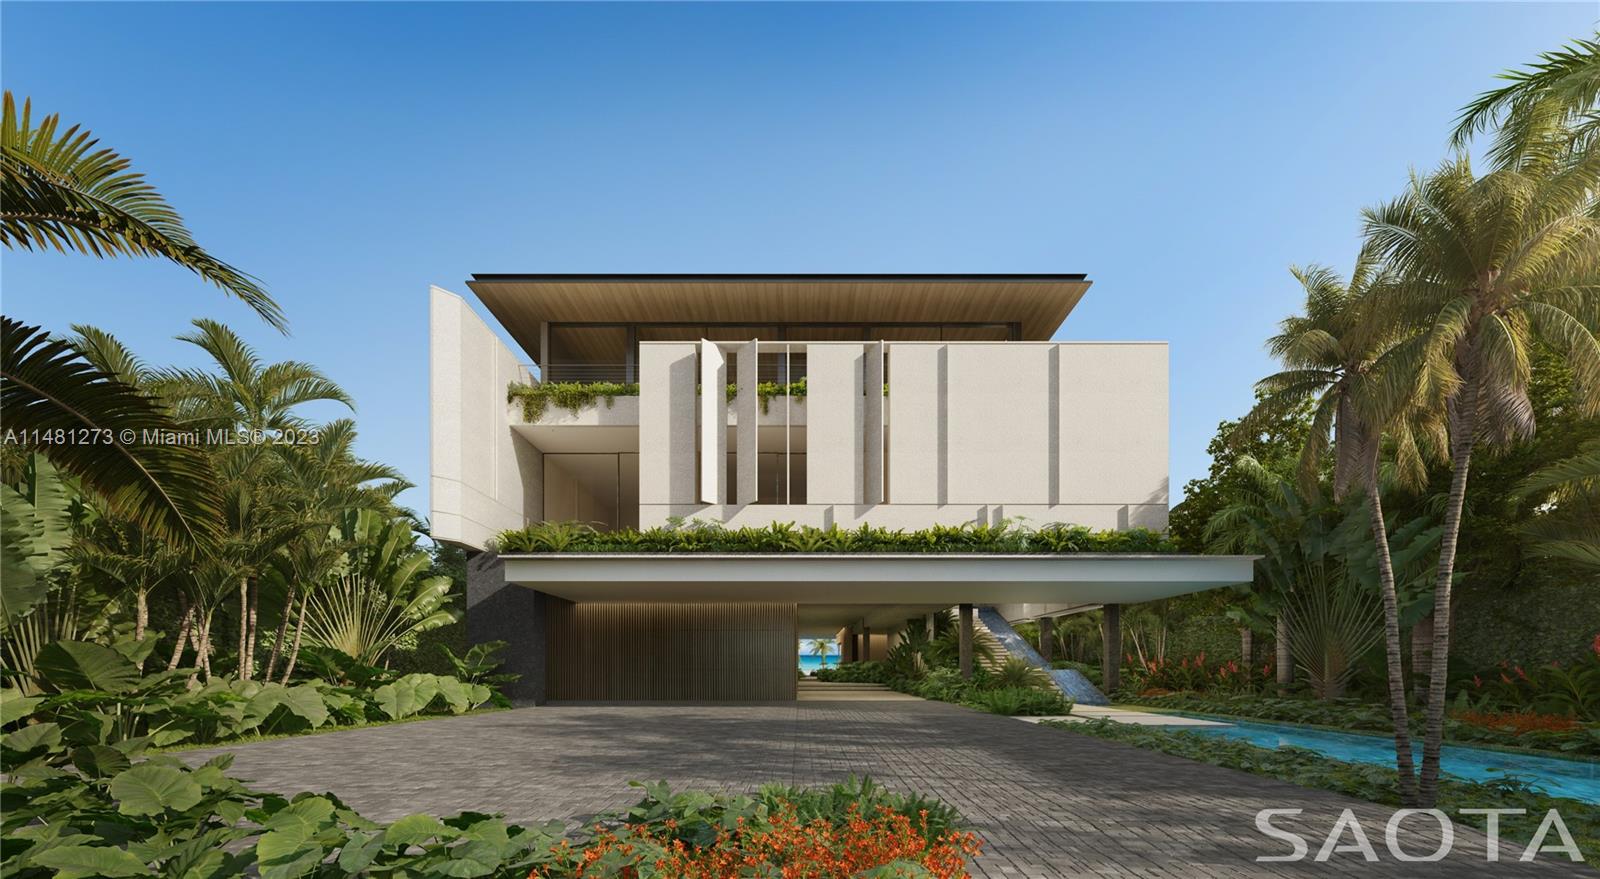 Situated on an extraordinary 21,000 SF oceanfront lot in the exclusive enclave of Golden Beach with 75 feet of pristine white sand beach, 399 Ocean Blvd presents a remarkable new construction opportunity. Offered as land with approved plans by internationally acclaimed architectural firm SAOTA, build a tropical modern masterpiece, with a 8,597 SF residence and 18,750 SF in total. With its substantial covered areas, outdoor and patio space, this resort like property is in true harmony with nature, creating a dramatic feeling of your living spaces extending to the ocean, maximizing views towards the Atlantic Ocean from all living areas. Own a piece of paradise in one of Florida's most sought-after areas w/a private beach, clubhouse, Golden Beach police force & tennis courts.